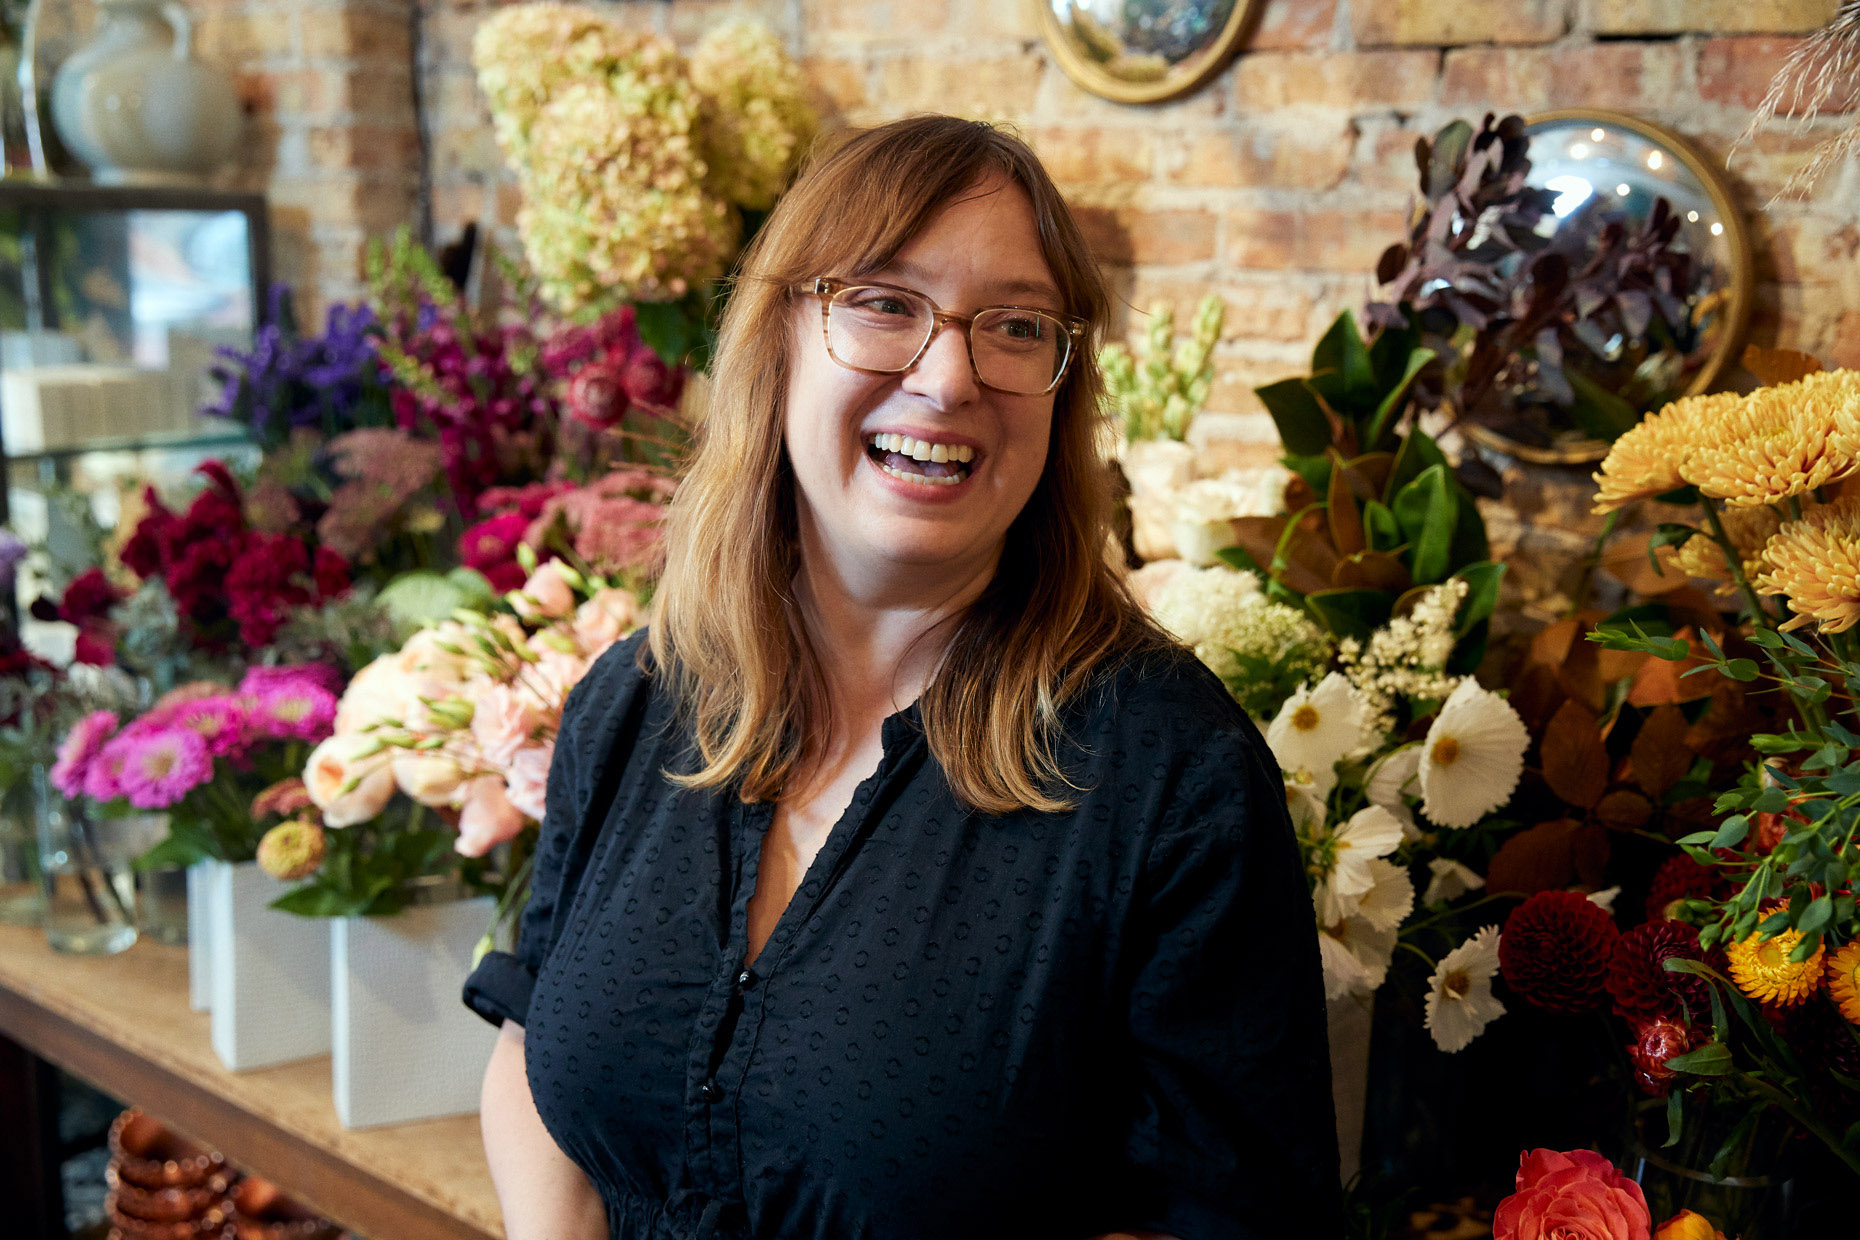 Florist smiling in her shop | lifestyle photography by Saverio Truglia